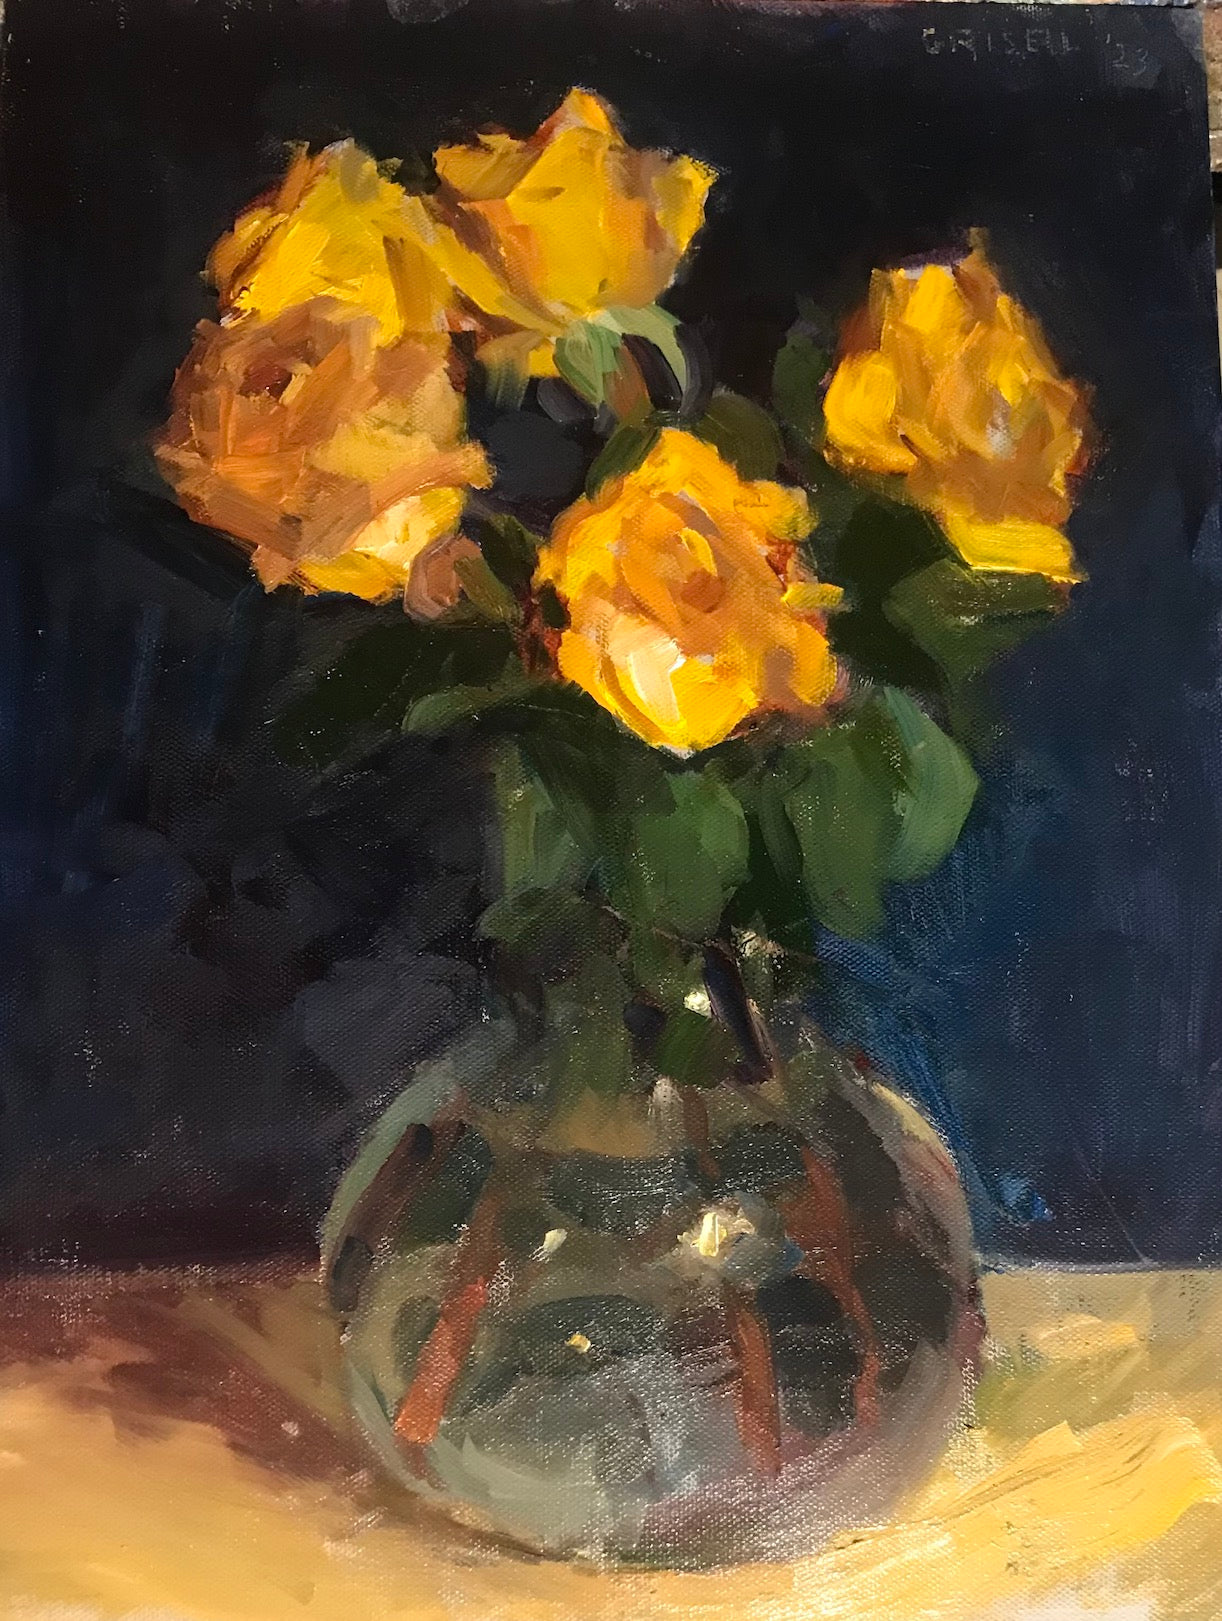 Yellow Roses in Glass Vase (16 x 12 Inches)